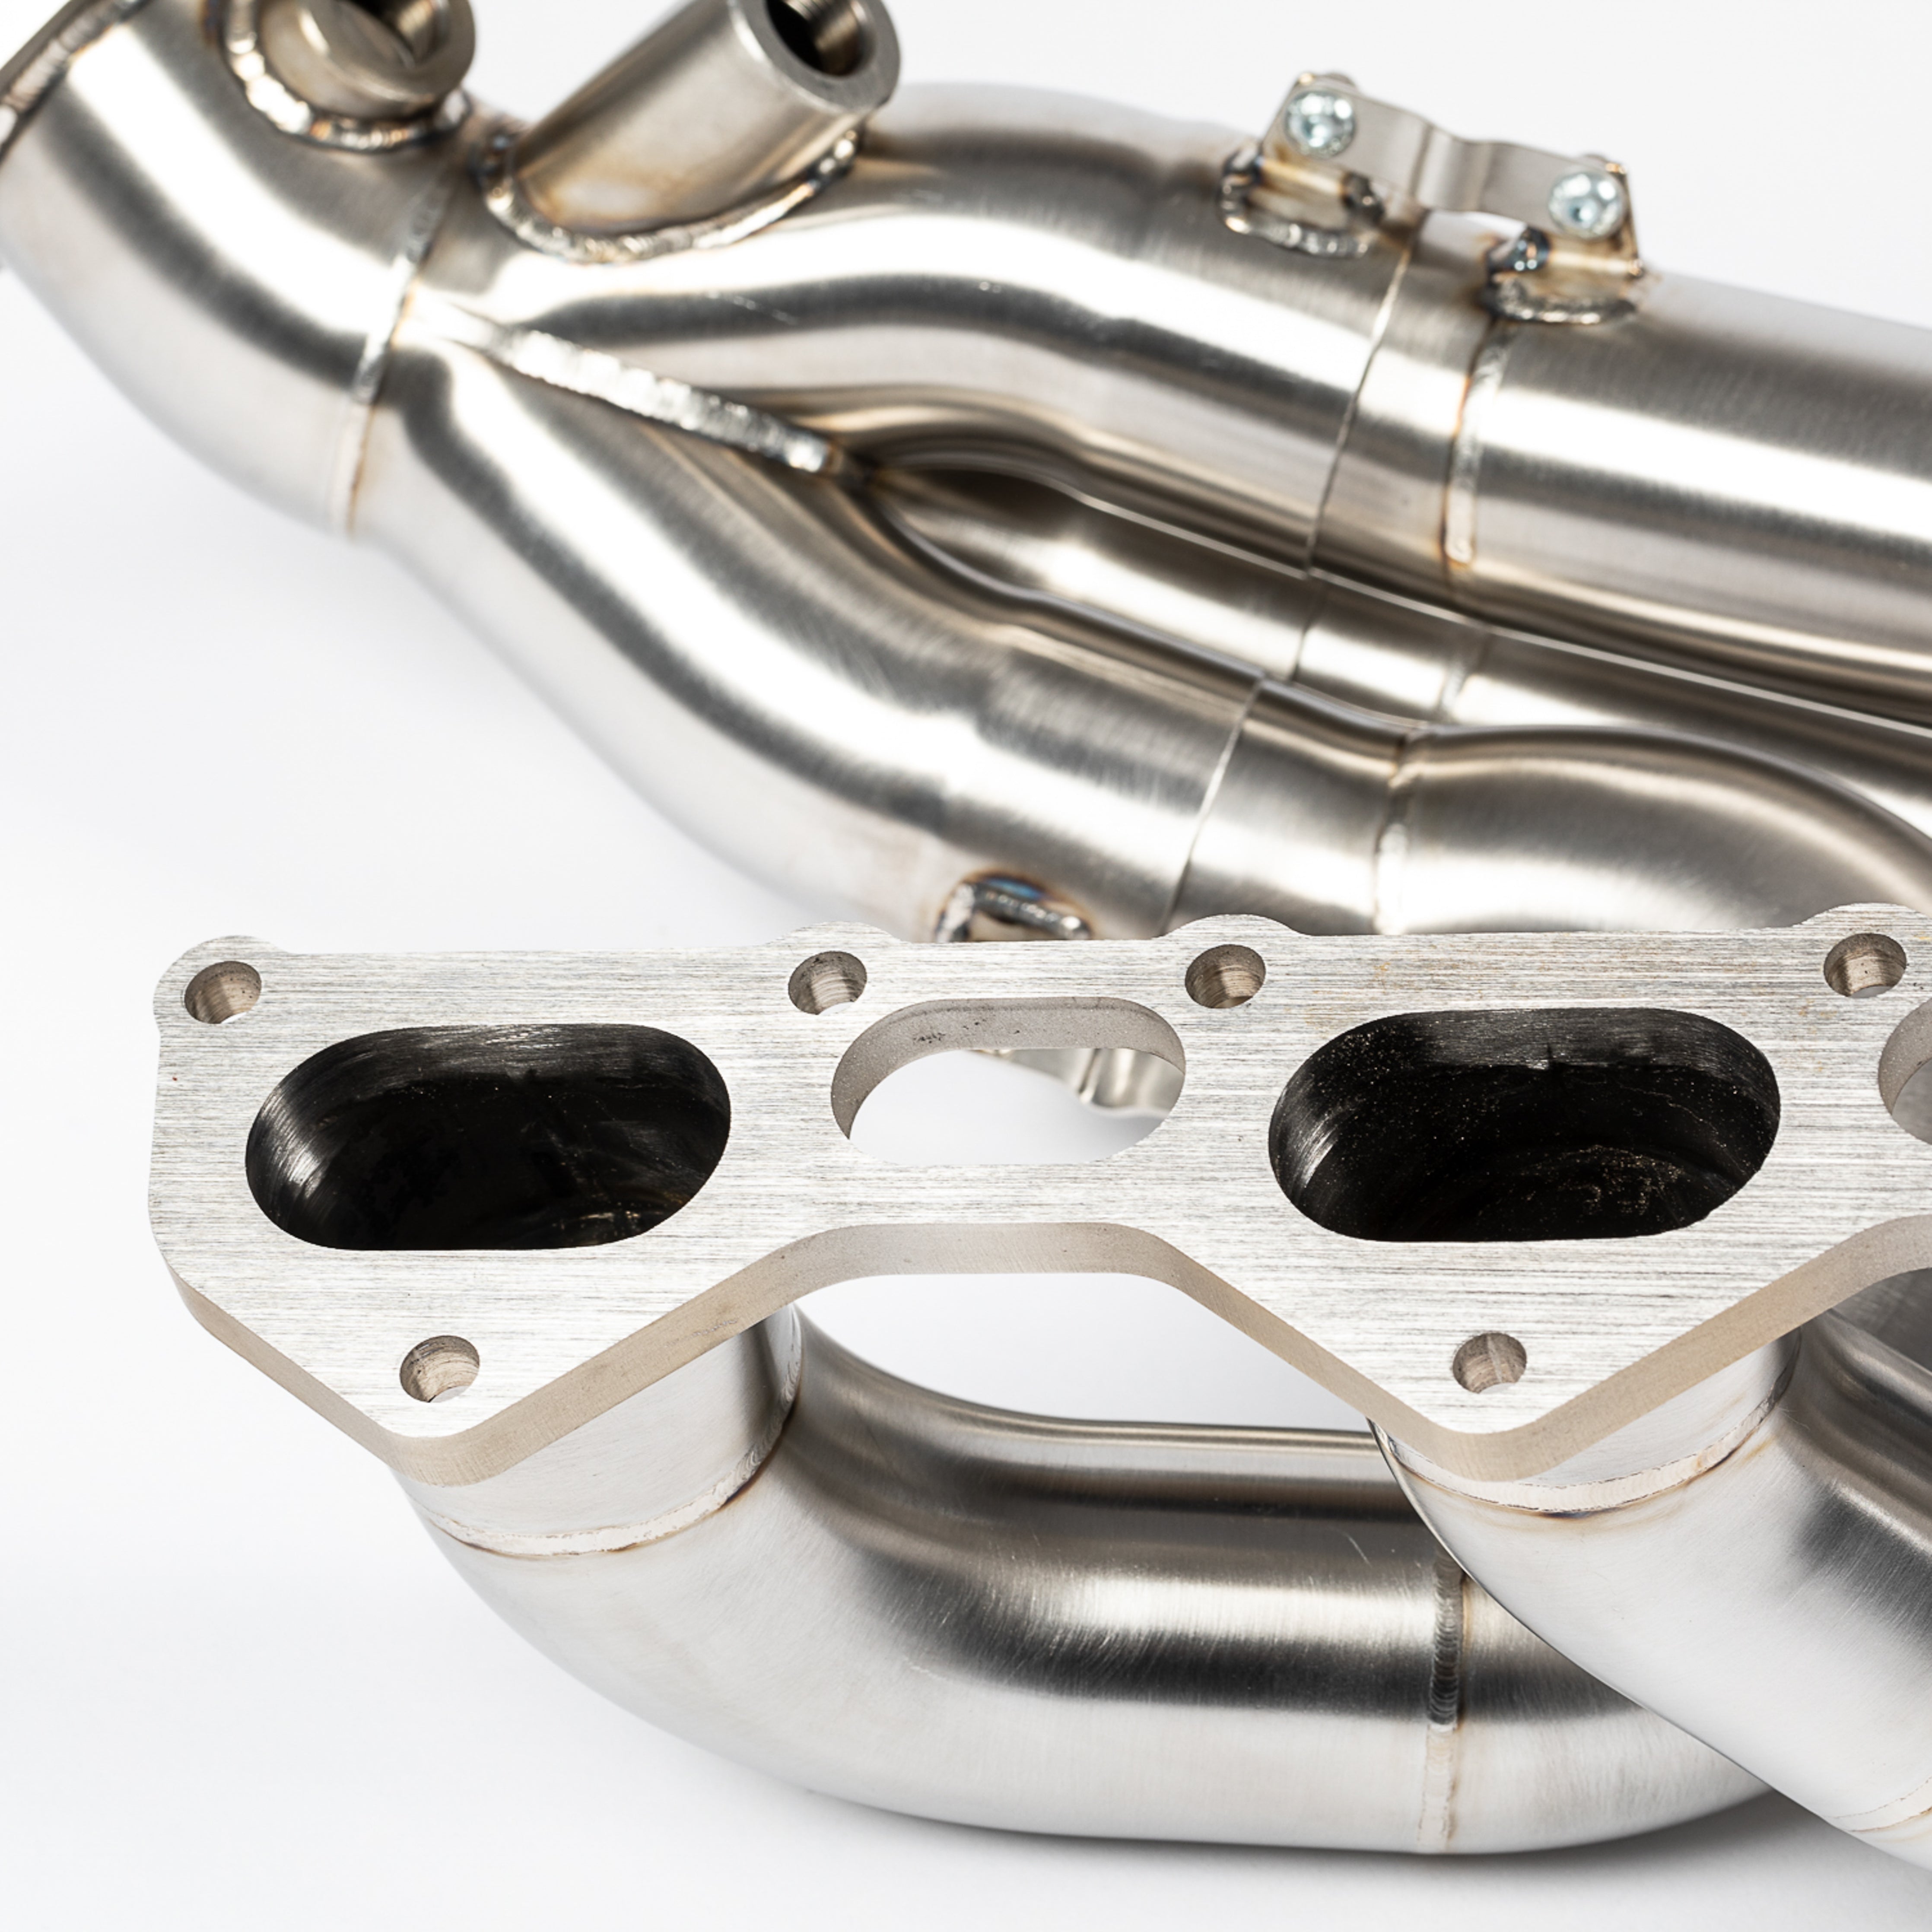 INCONEL RACE MANIFOLD & LINK PIPES (RACE CATS)